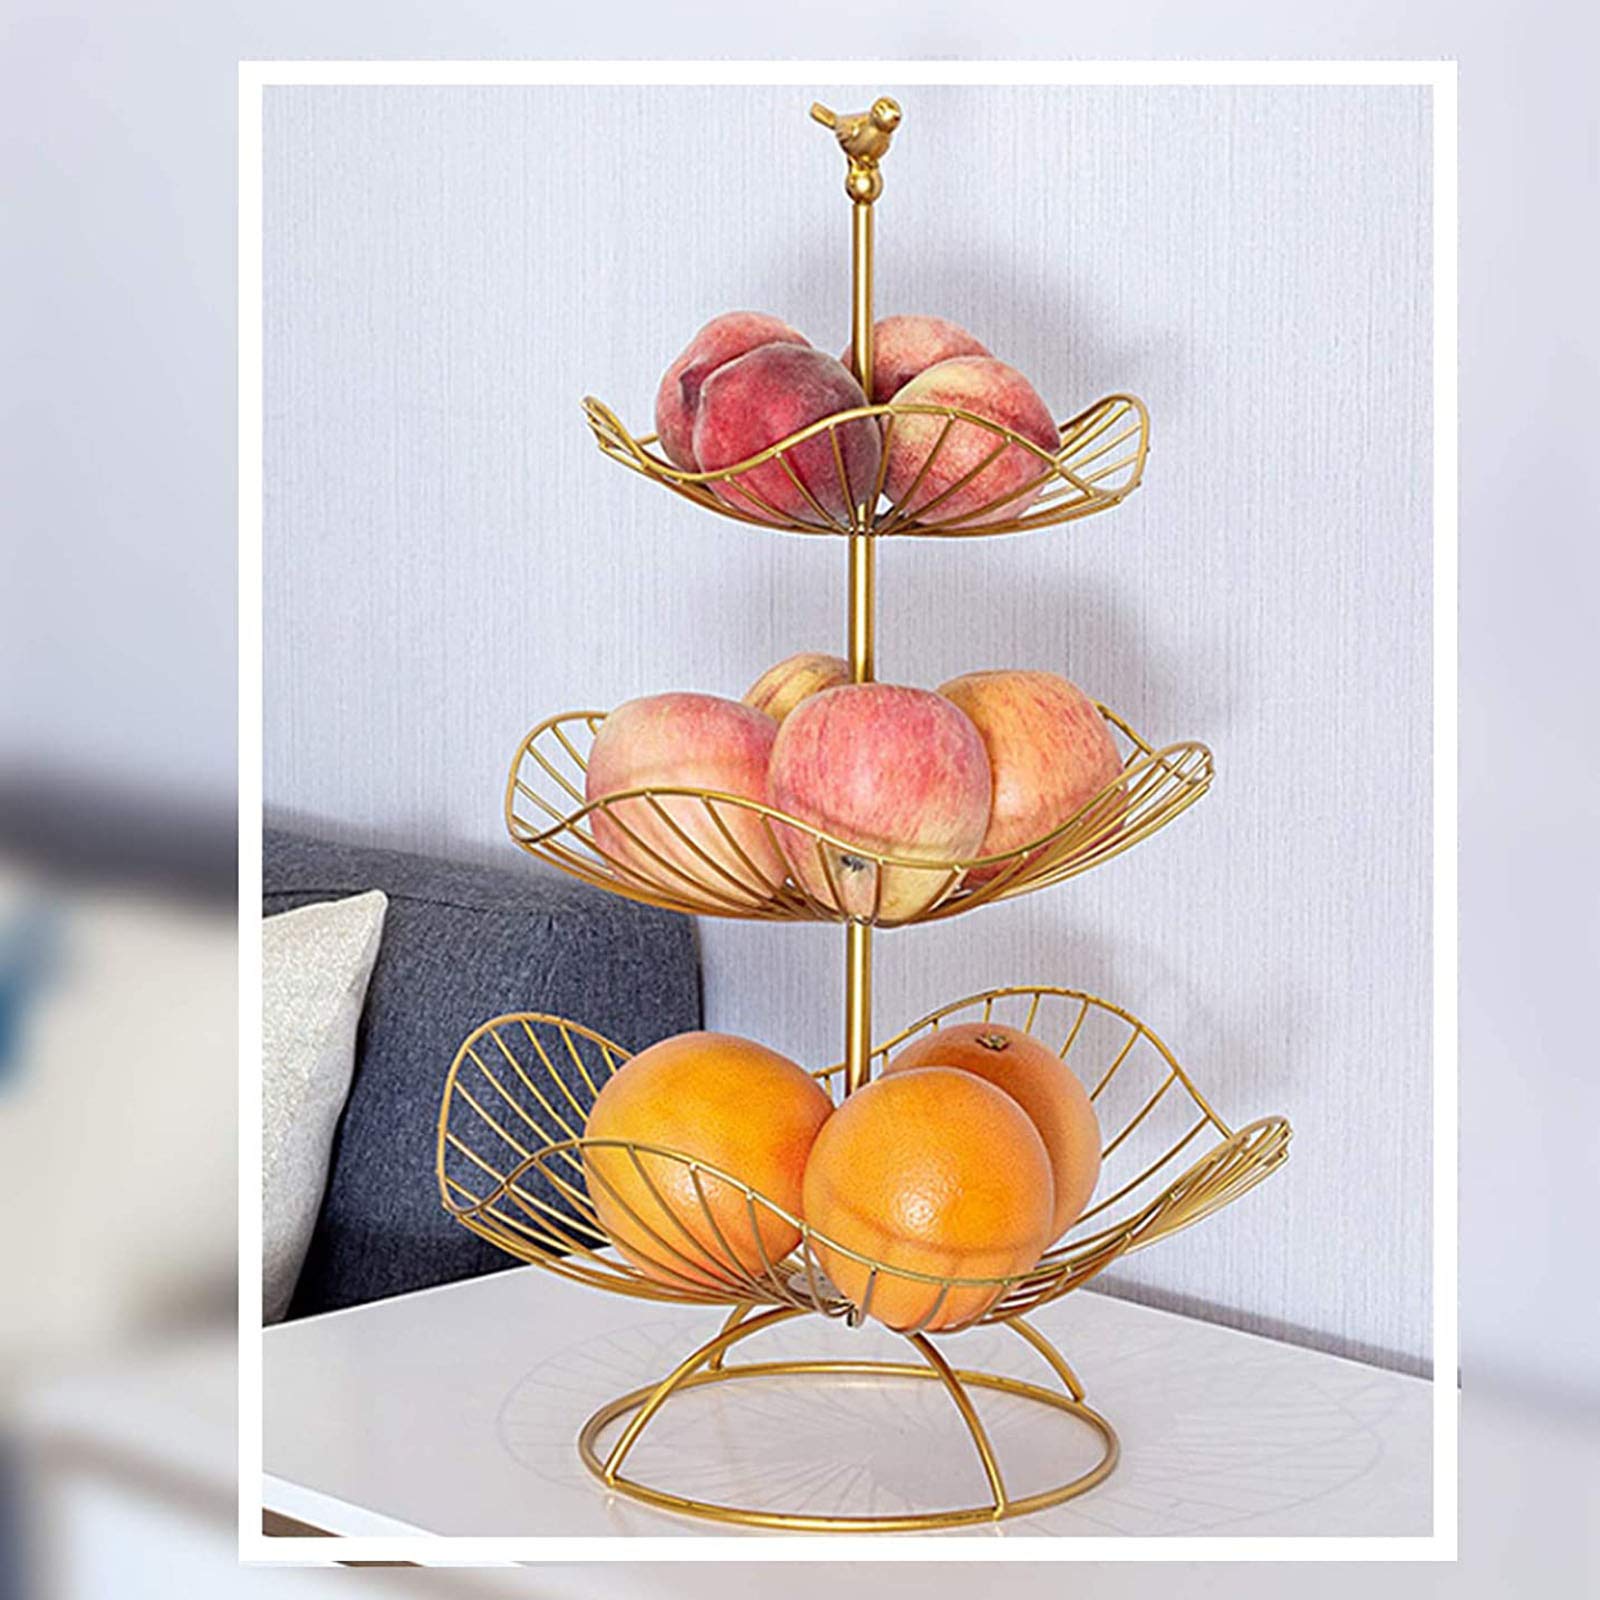 MINIDUo 3 Tier Fruit Basket,Metal Fruits Vegetable Bowl Desserts Candy Buffet Plates Serving Tray for Family Dinner Birthday Party Wedding-Gold,LotusLeafBlack